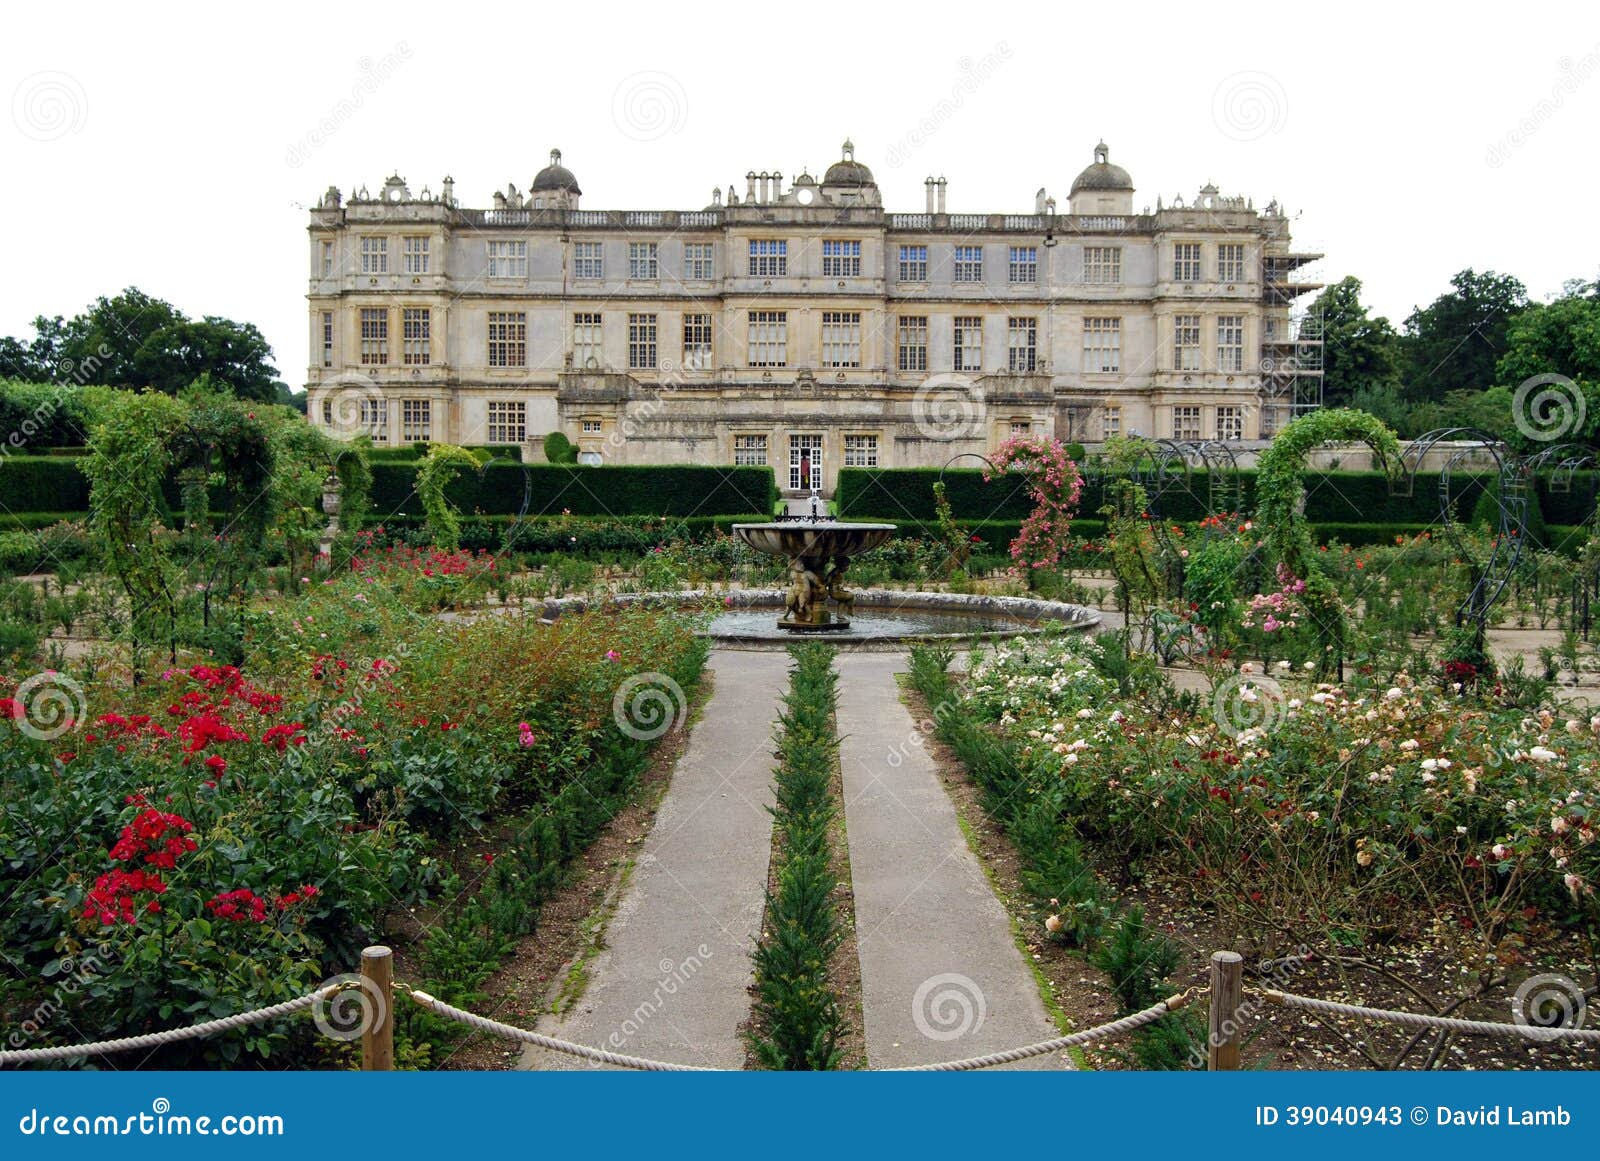 longleat house, wiltshire